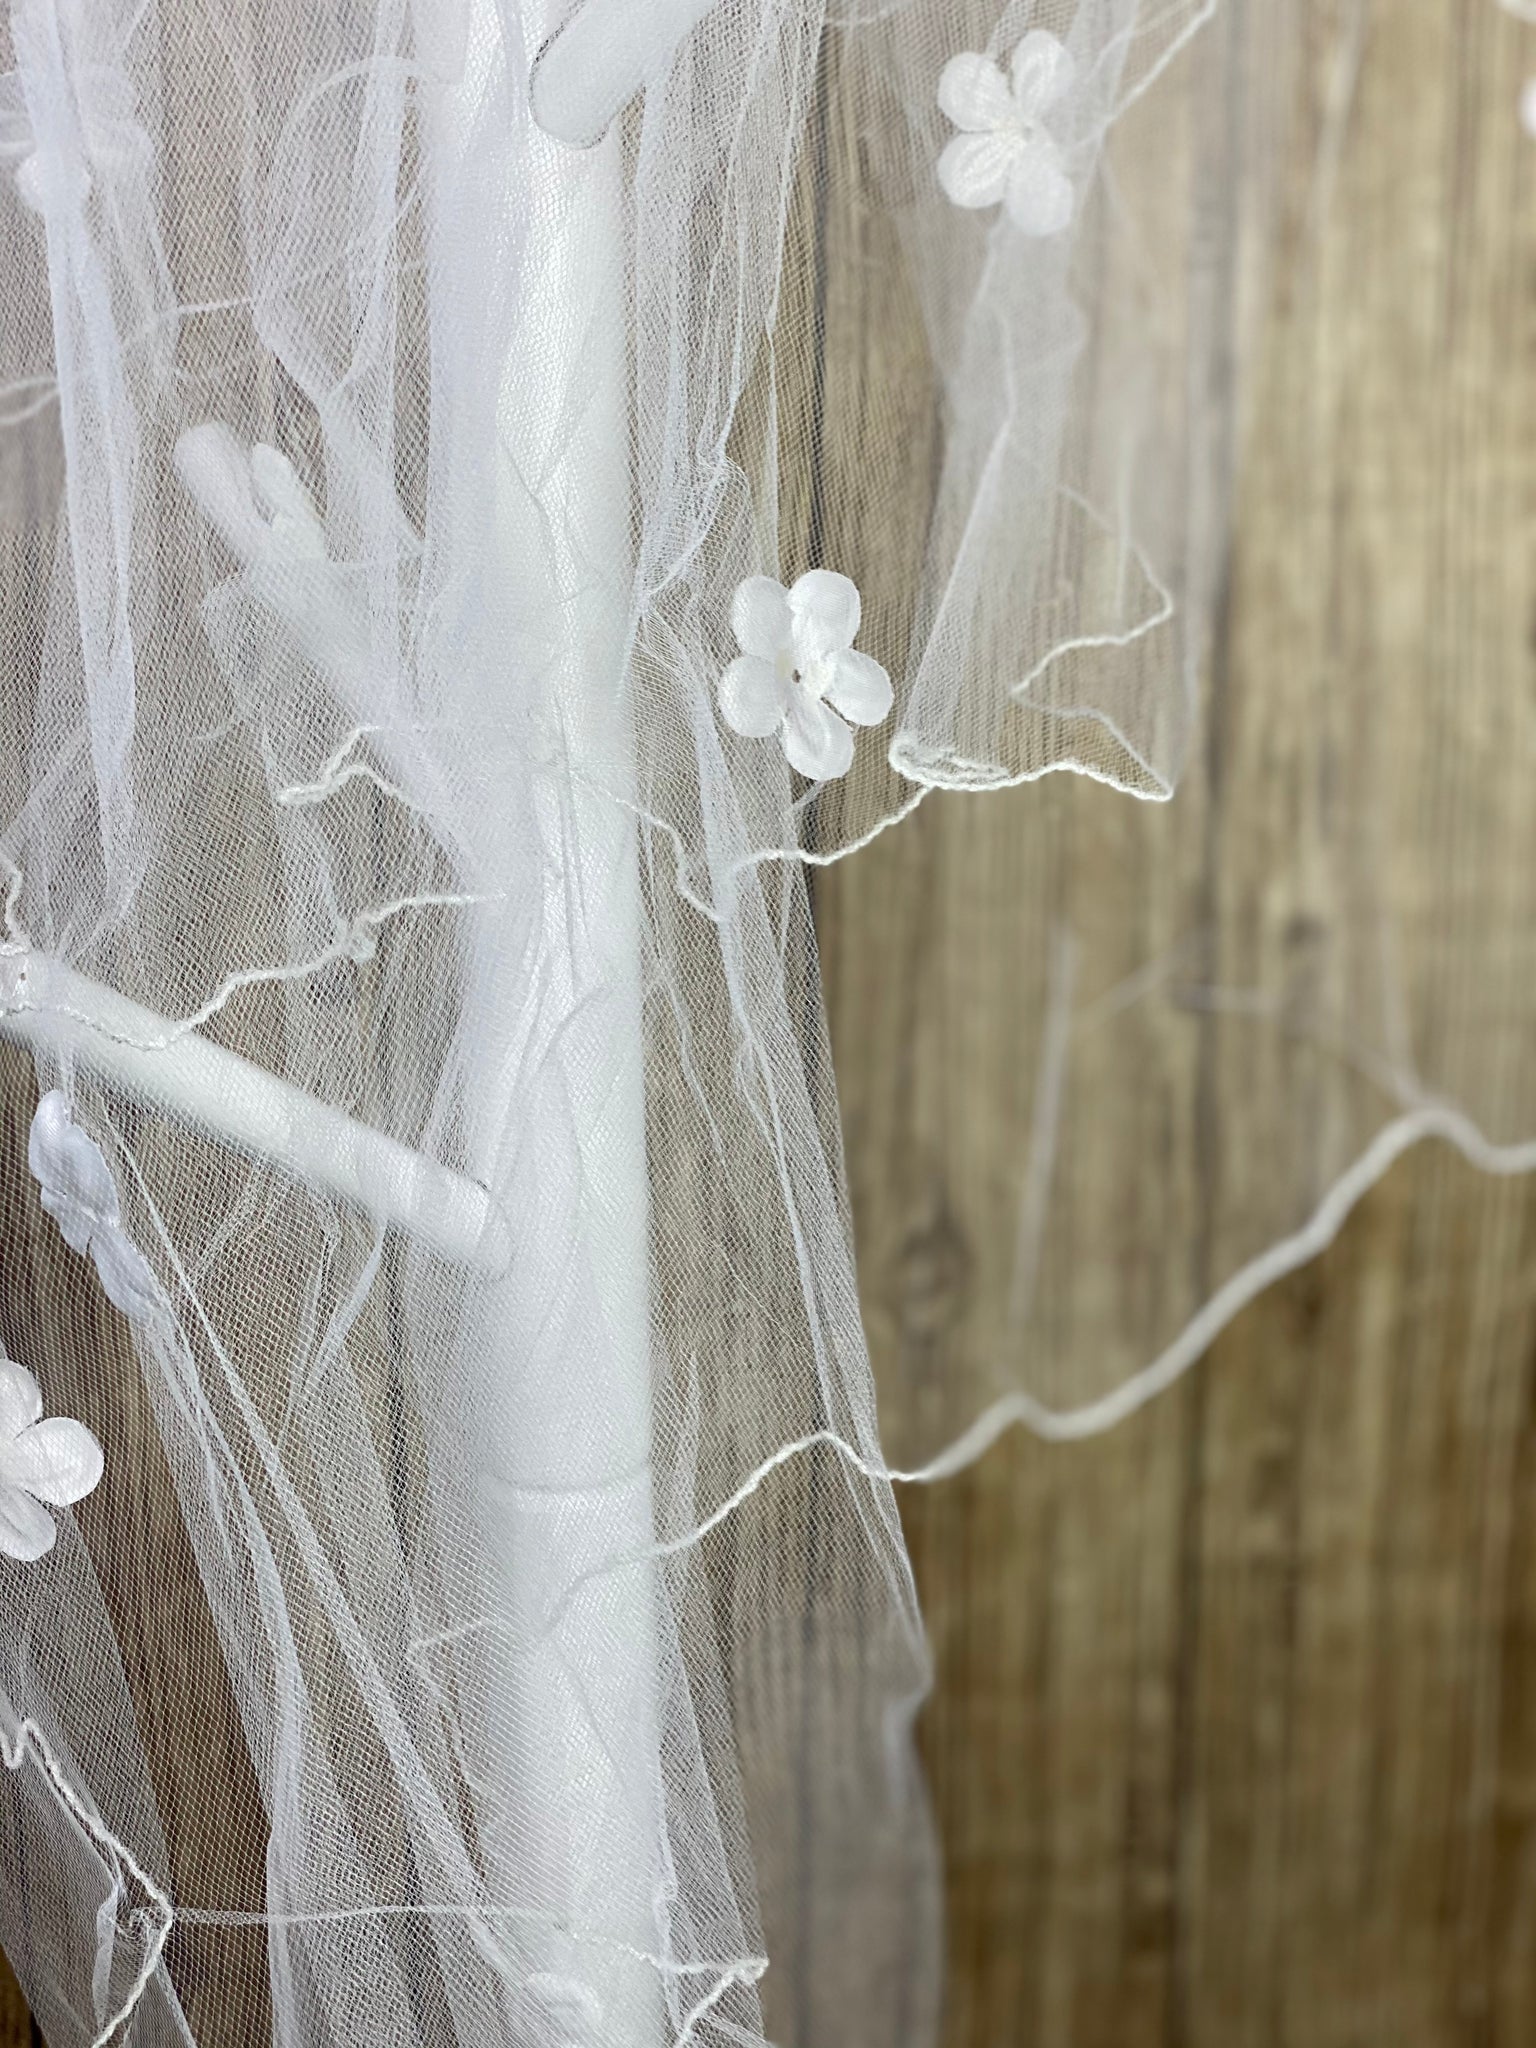 White - Flower Veil for First Communion   Elegant soft 2 layer tulle veil with delicate hand stitched white pencil trim and floating flowers.  Veil length - 35 in. long, comb - 7 cm wide  Materials:  sturdy plastic comb, soft tulle, and applique - flowers.